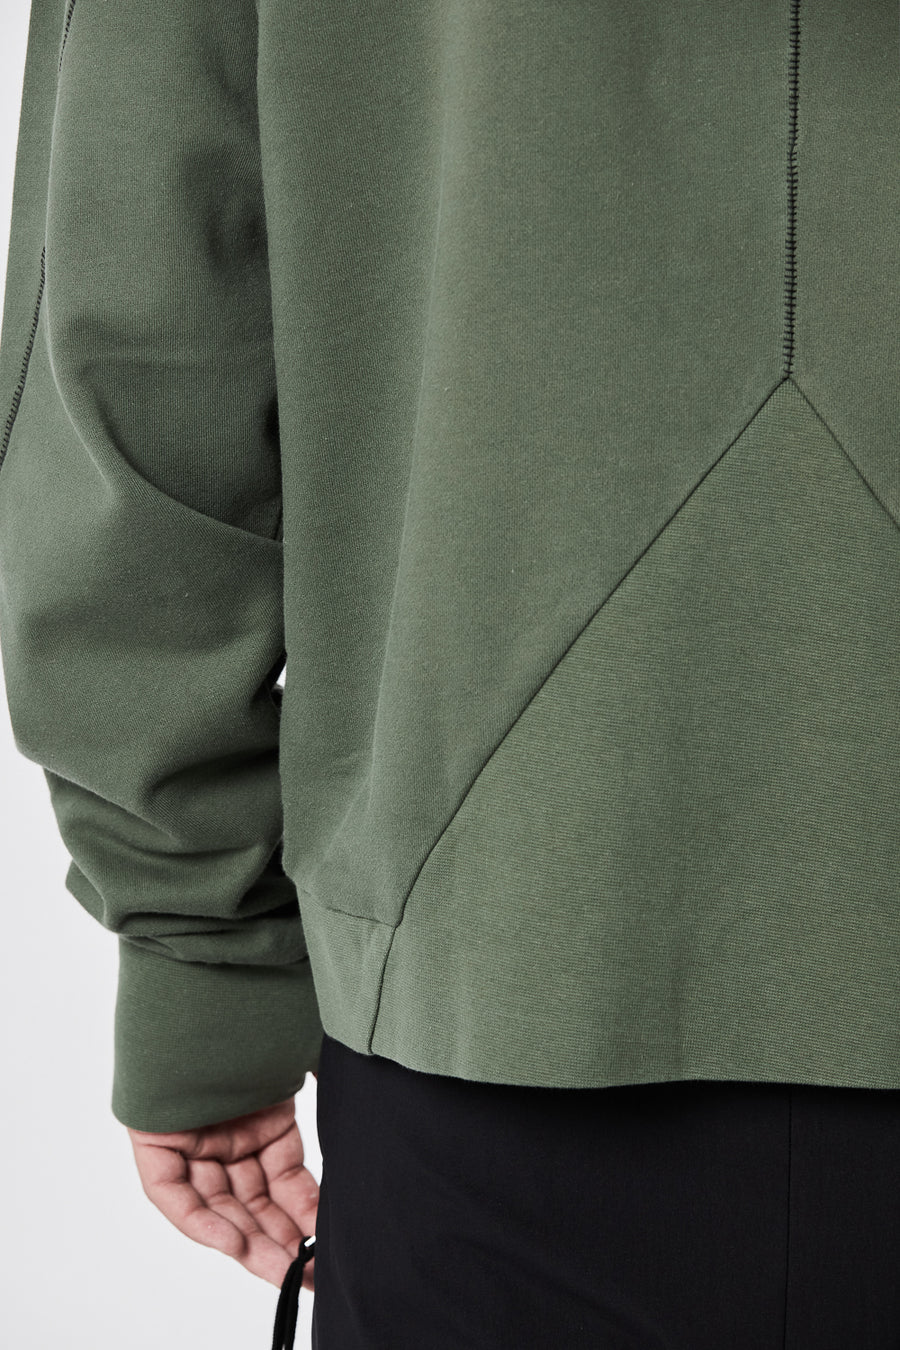 Buy the Thom Krom M S 156 Hoodie in Green at Intro. Spend £50 for free UK delivery. Official stockists. We ship worldwide.